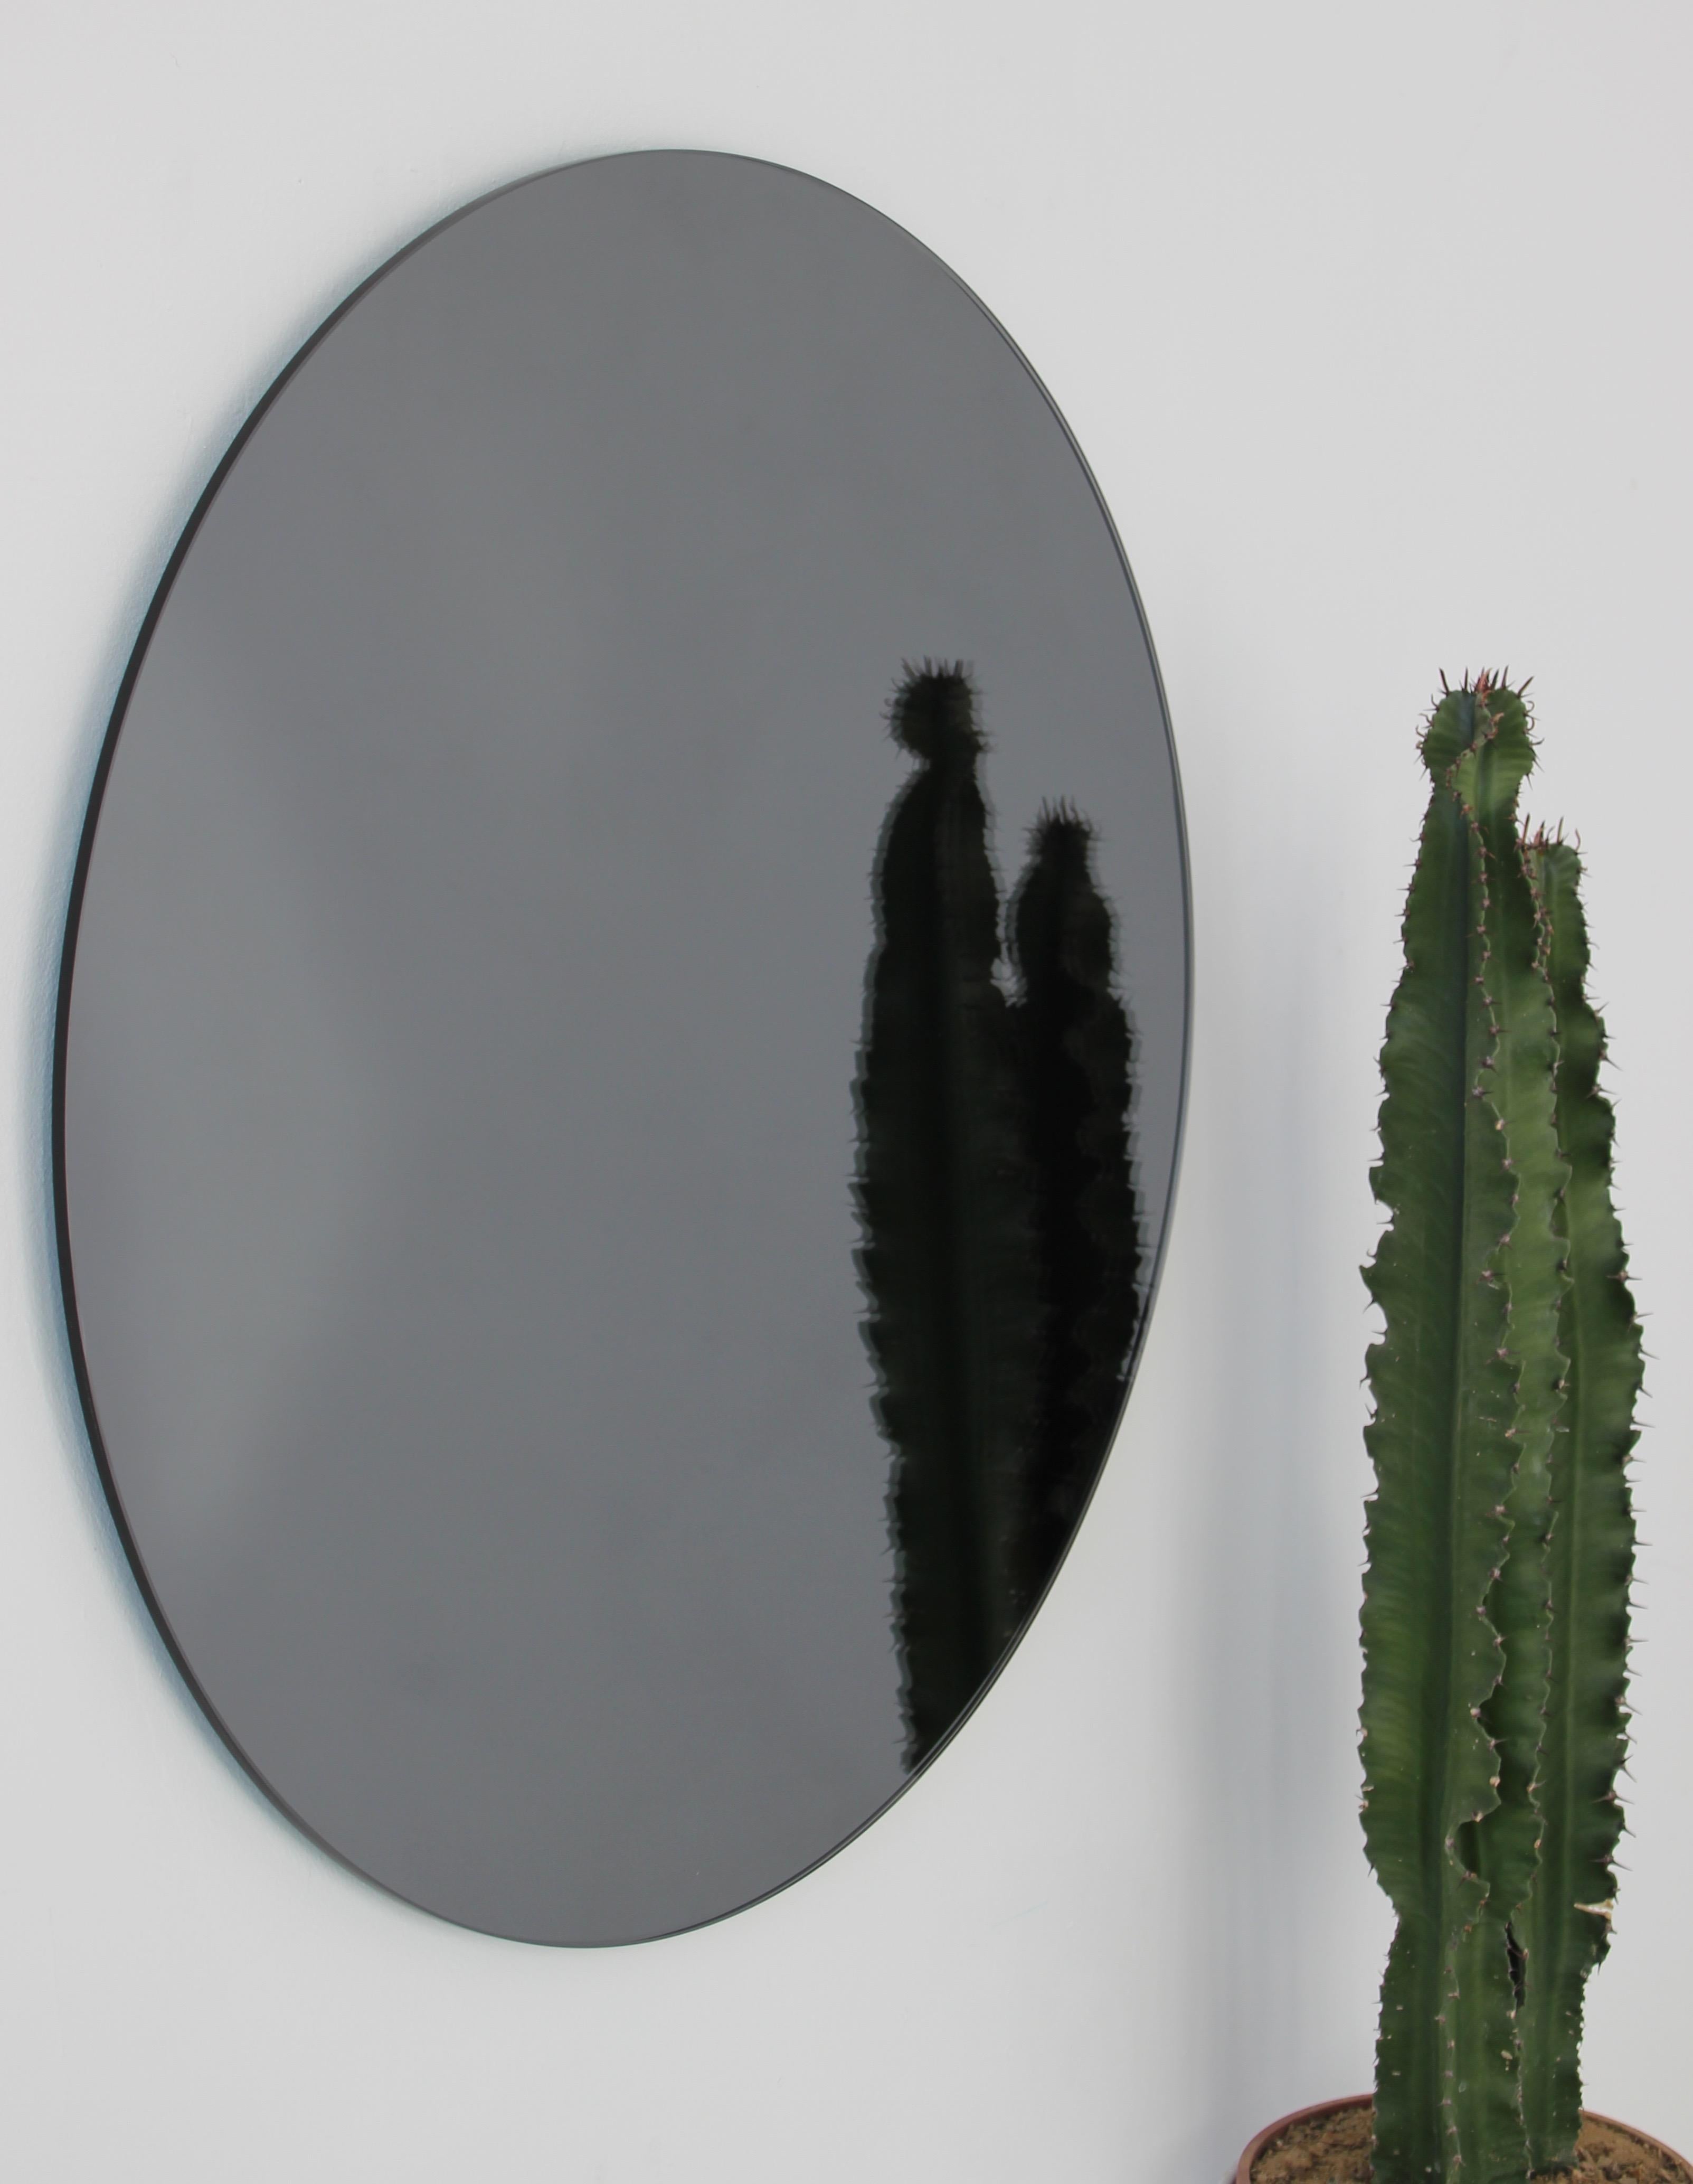 Blackened Orbis Black Tinted Round Frameless Modern Mirror with Floating Effect, Medium For Sale